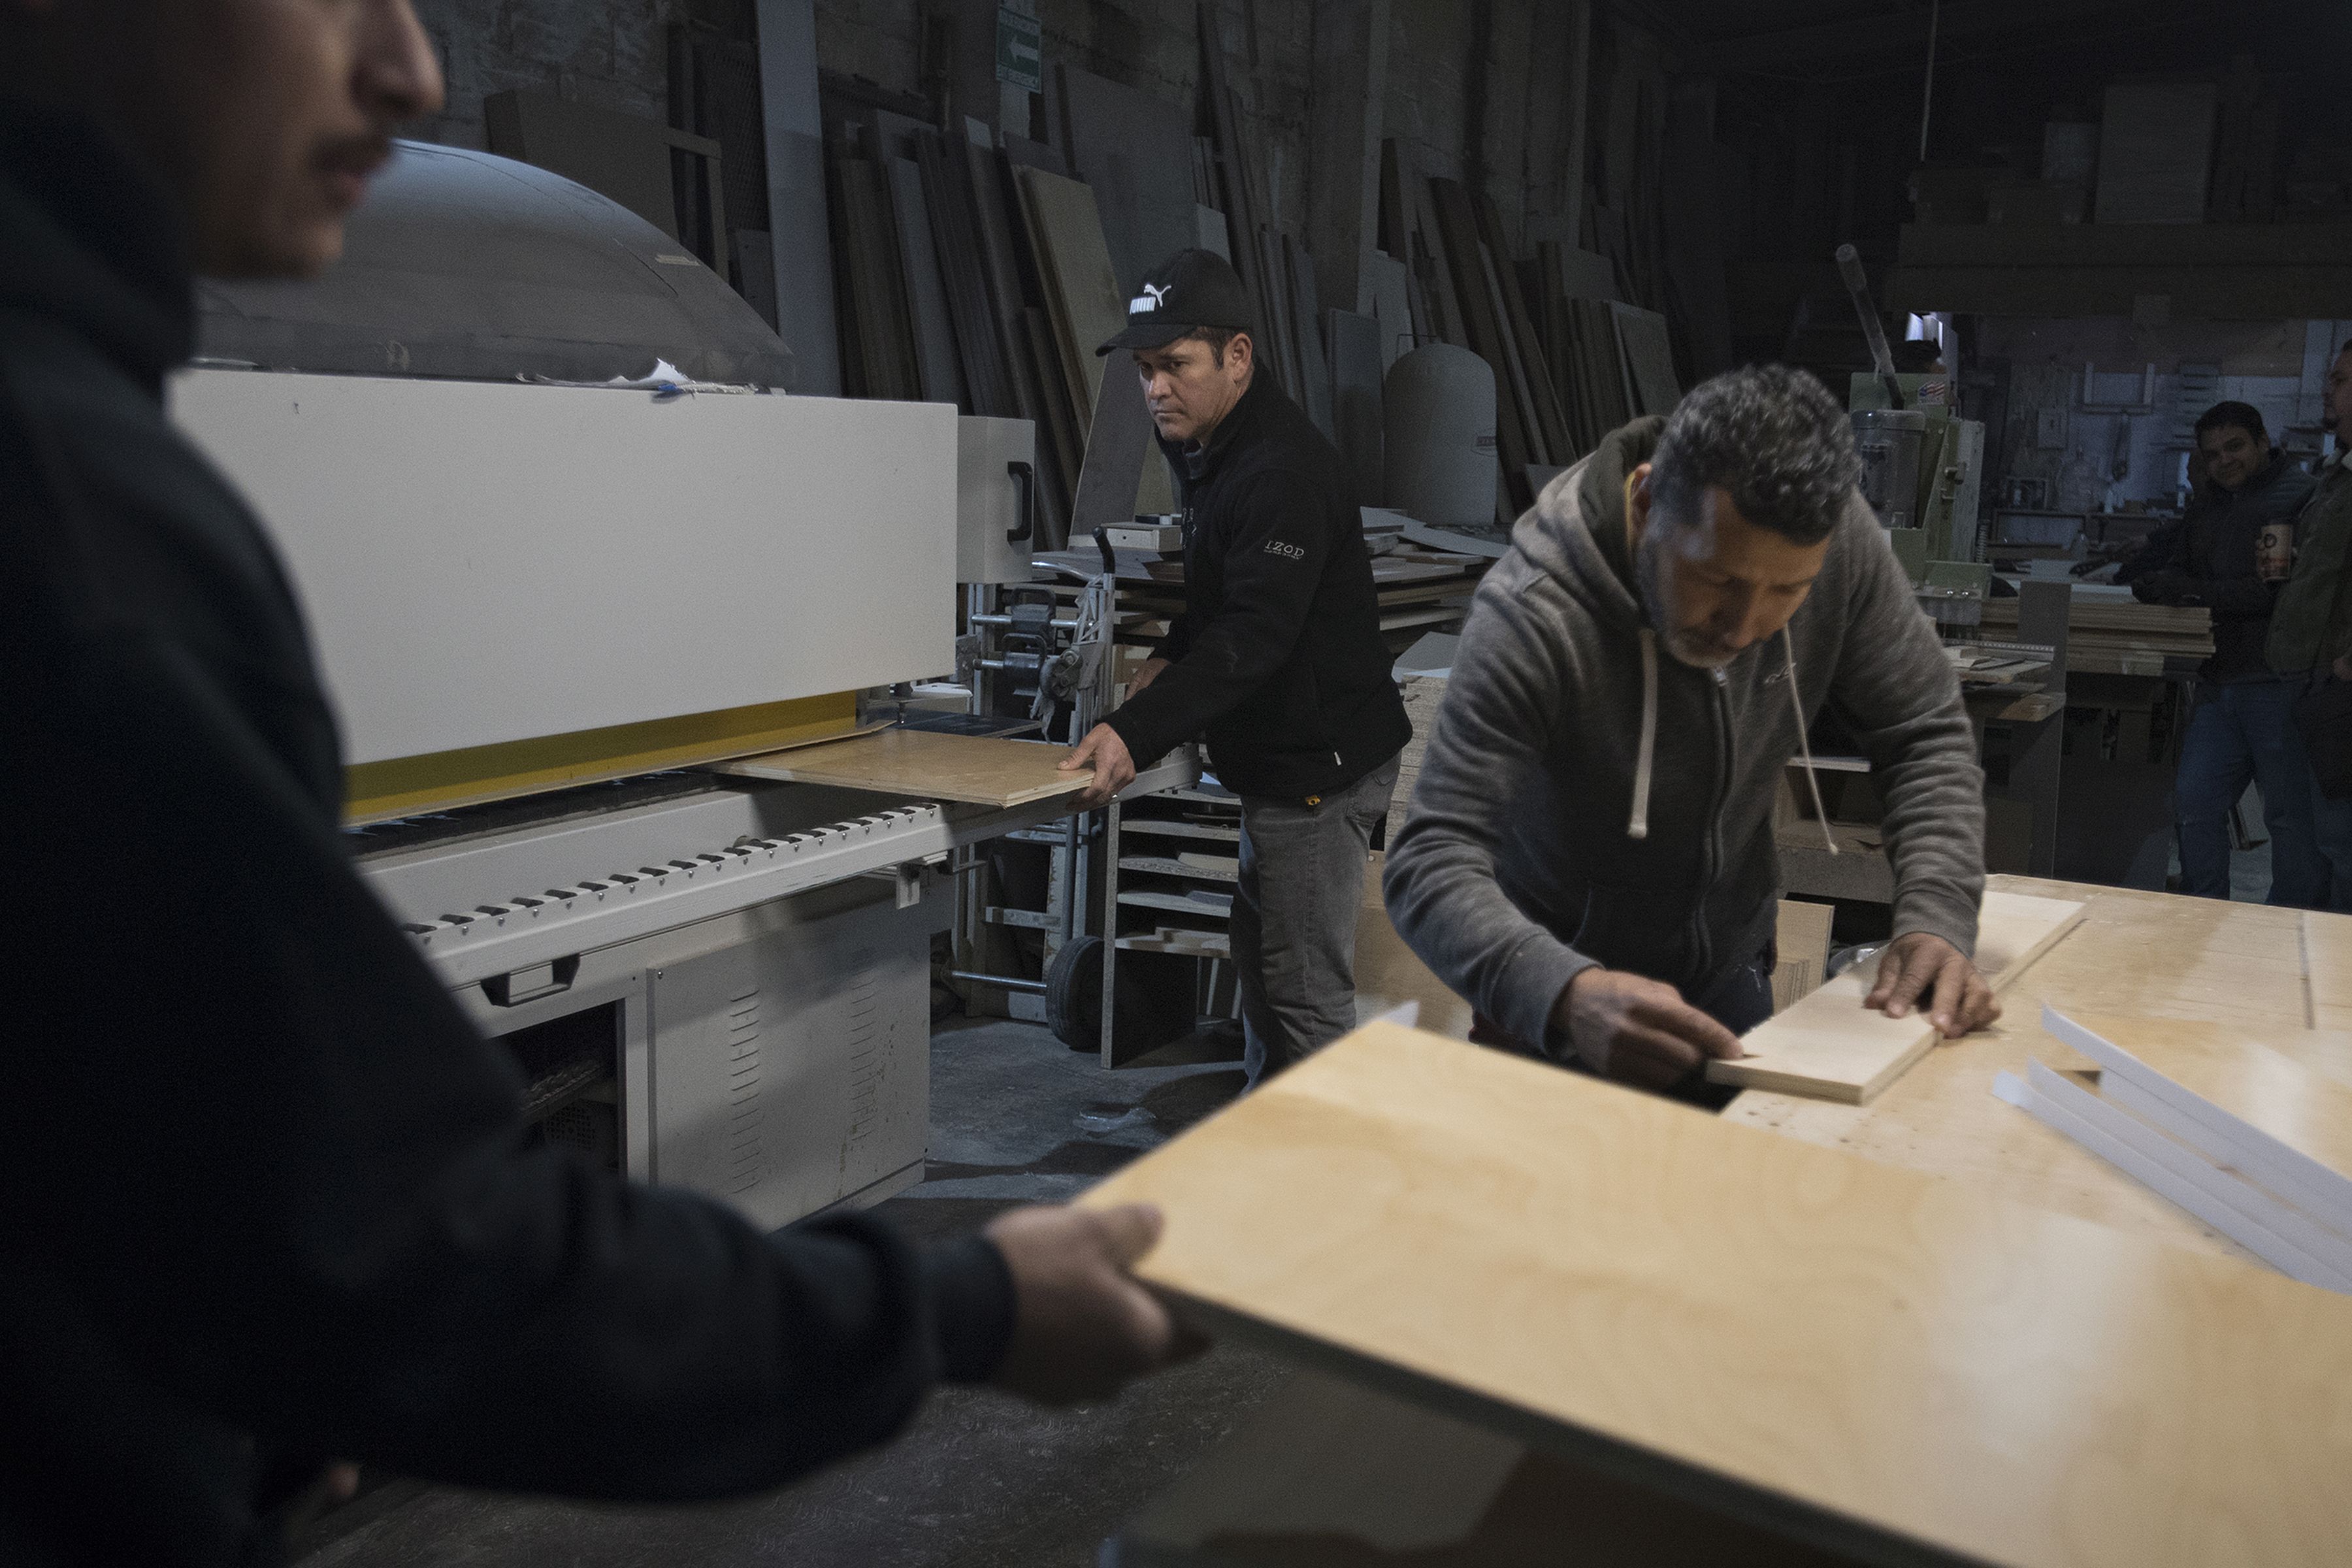 Ramon Flores makes custom cabinets for work in Tijuana. When Flores lived in Vancouver, he owned his own successful business. Image by Amanda Cowan. Mexico, 2019.